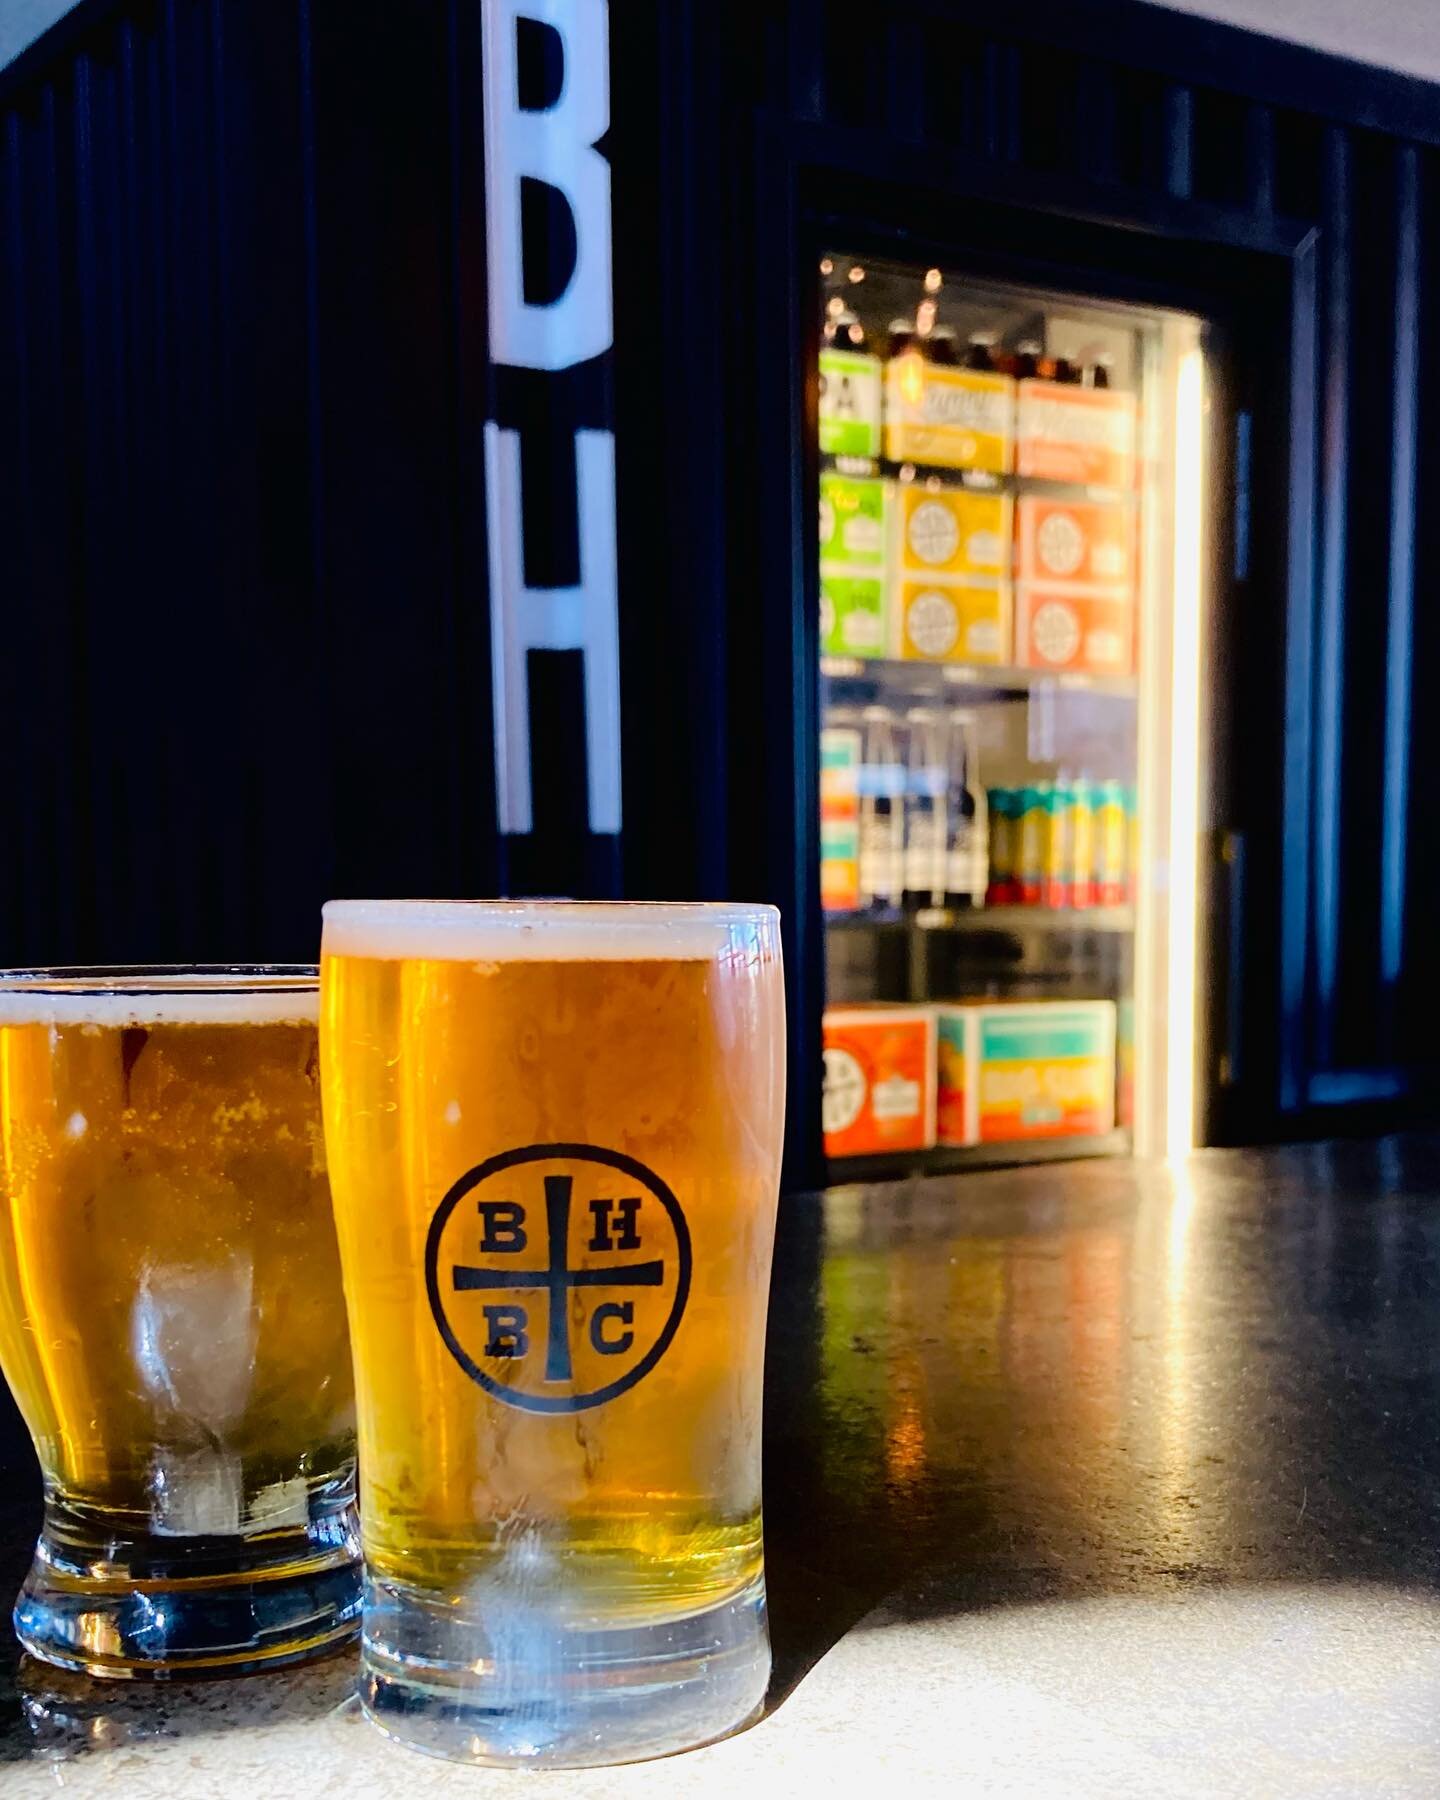 ☀️Good weather deserves to be enjoyed with great beer, and a Sunny Daze is a good start for any Sunday! 
Grab yourself a pint, and enjoy live music with guitarist and singer @acmylesmusic 
Performing 2:00-4:30pm
&amp; food vendor @chimbozbbq in the b